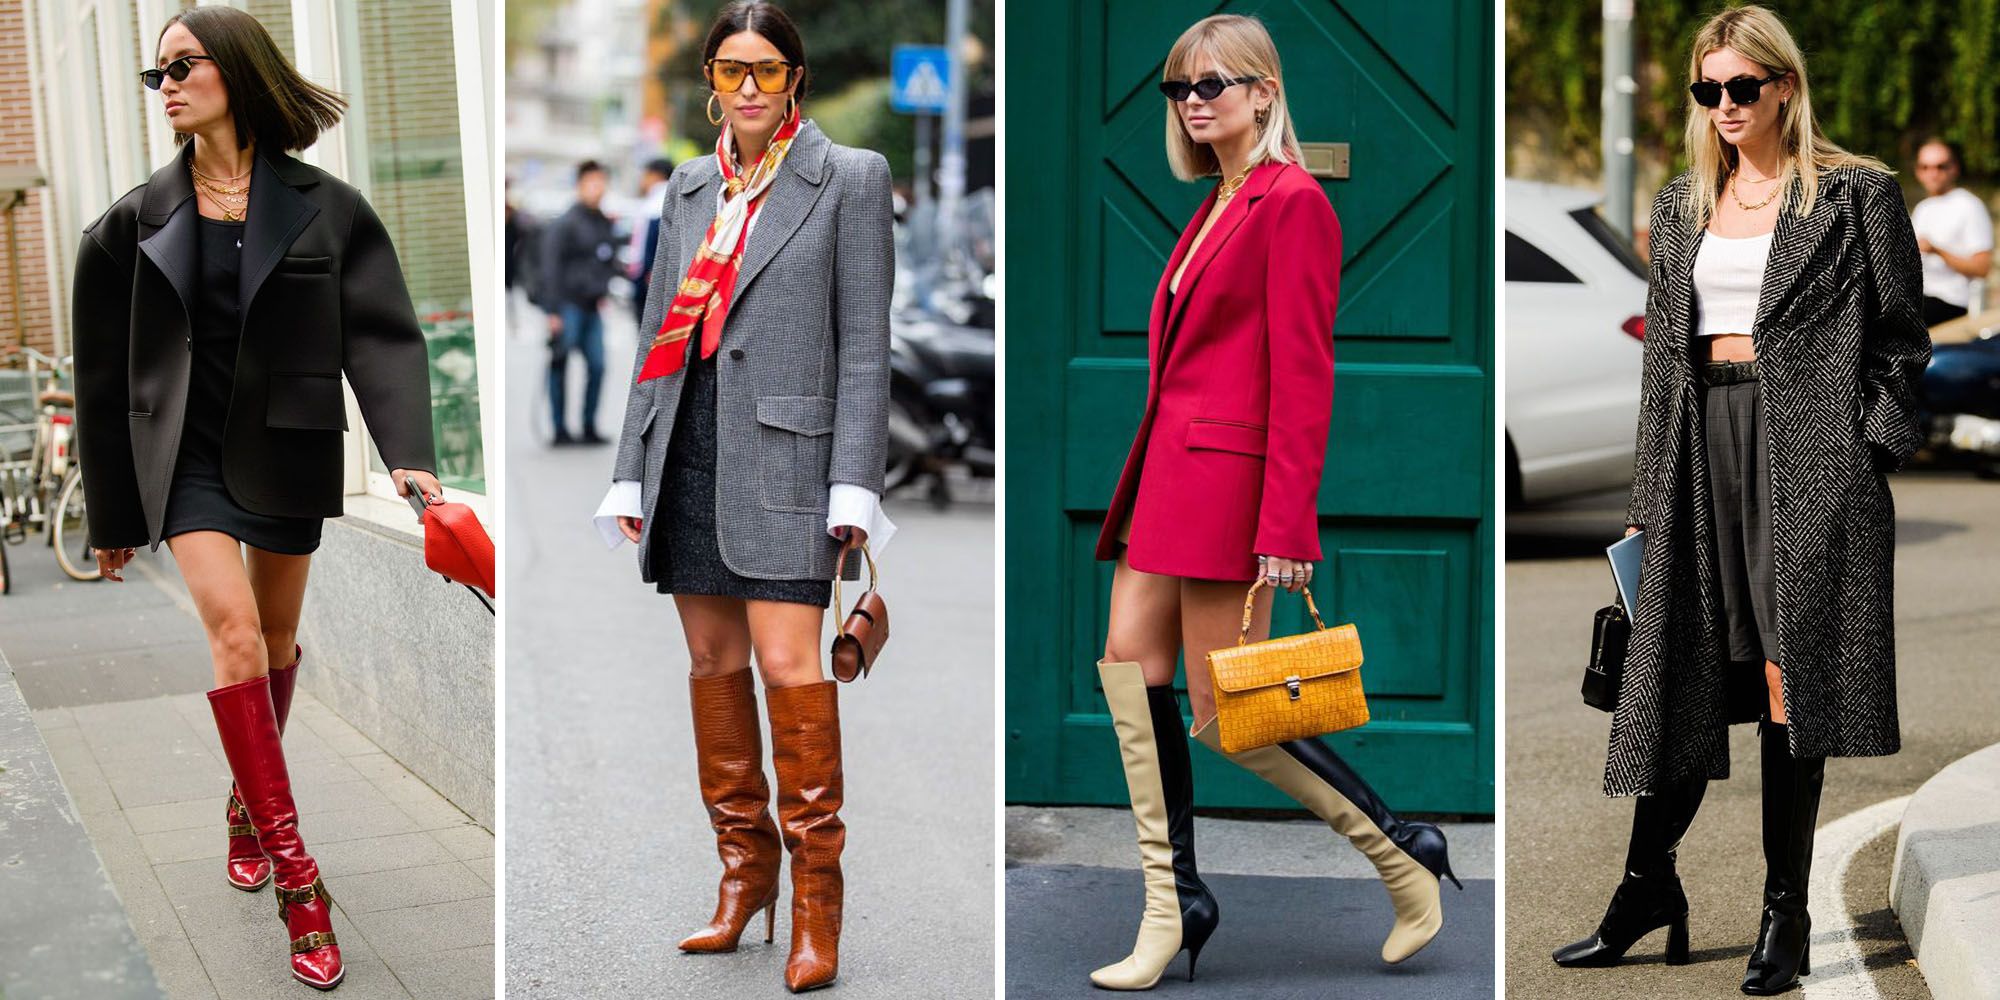 21 Stylish Ways to Wear Knee High Boots - The Best Knee High Boots